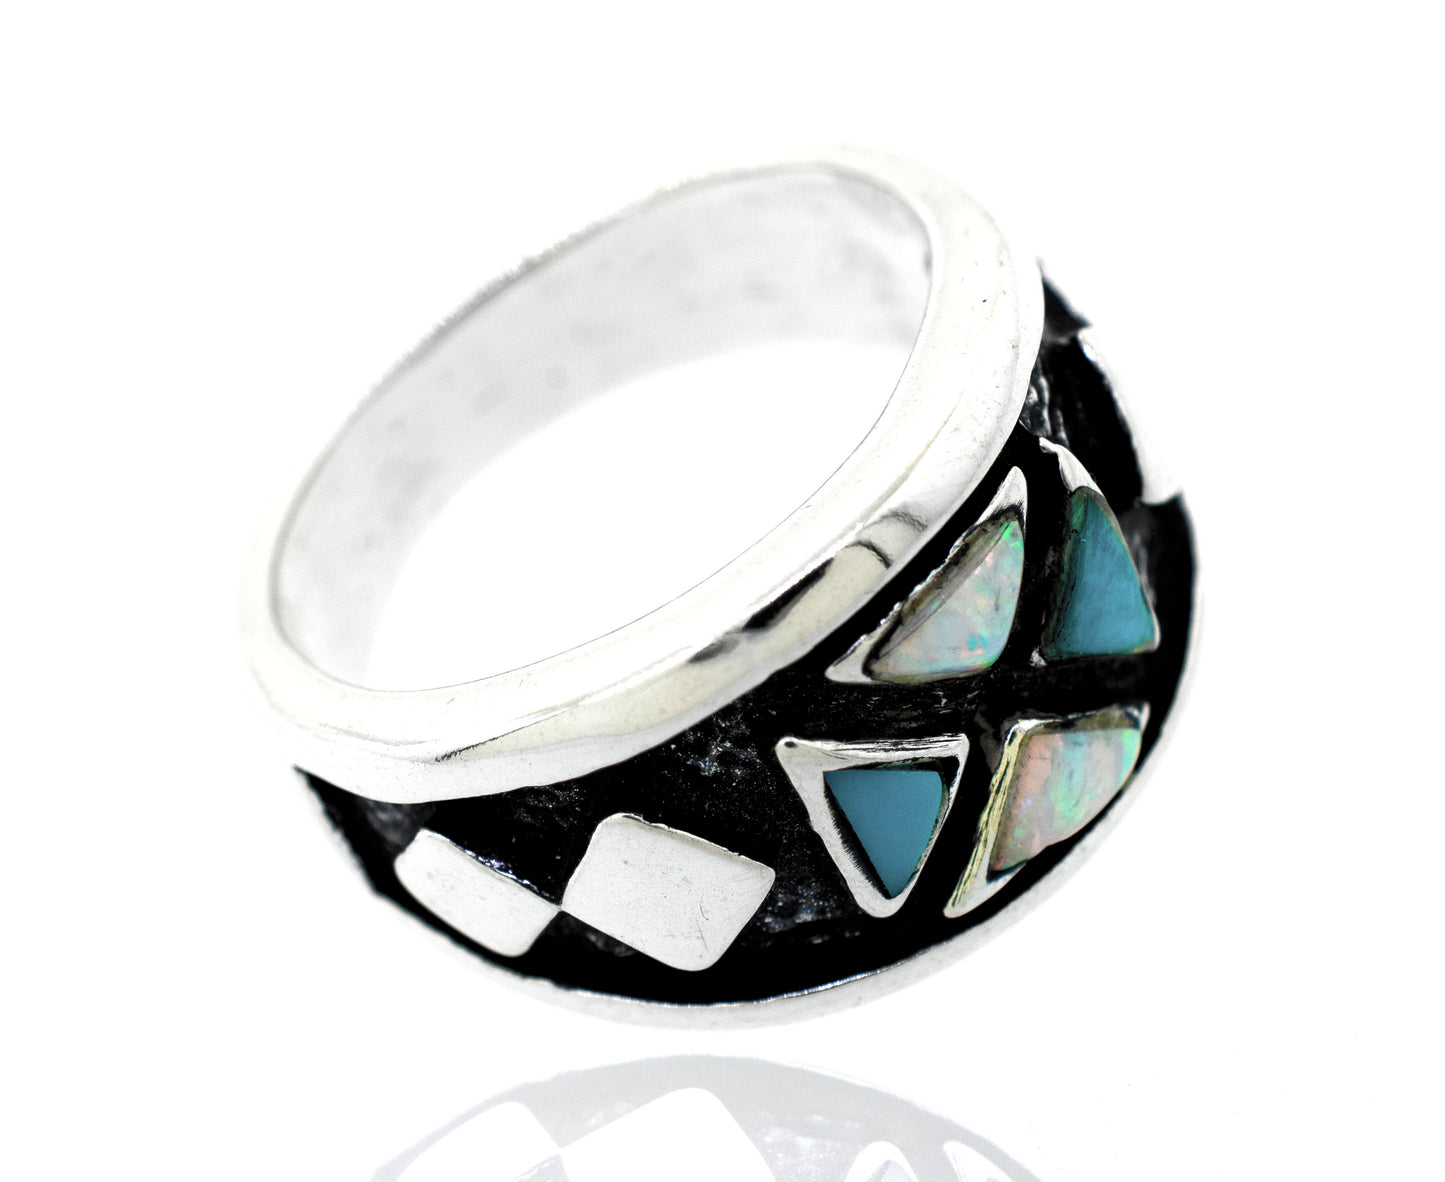 A Super Silver American Made Men's Opal And Turquoise Ring with a cultured opal and blue copper turquoise stones.